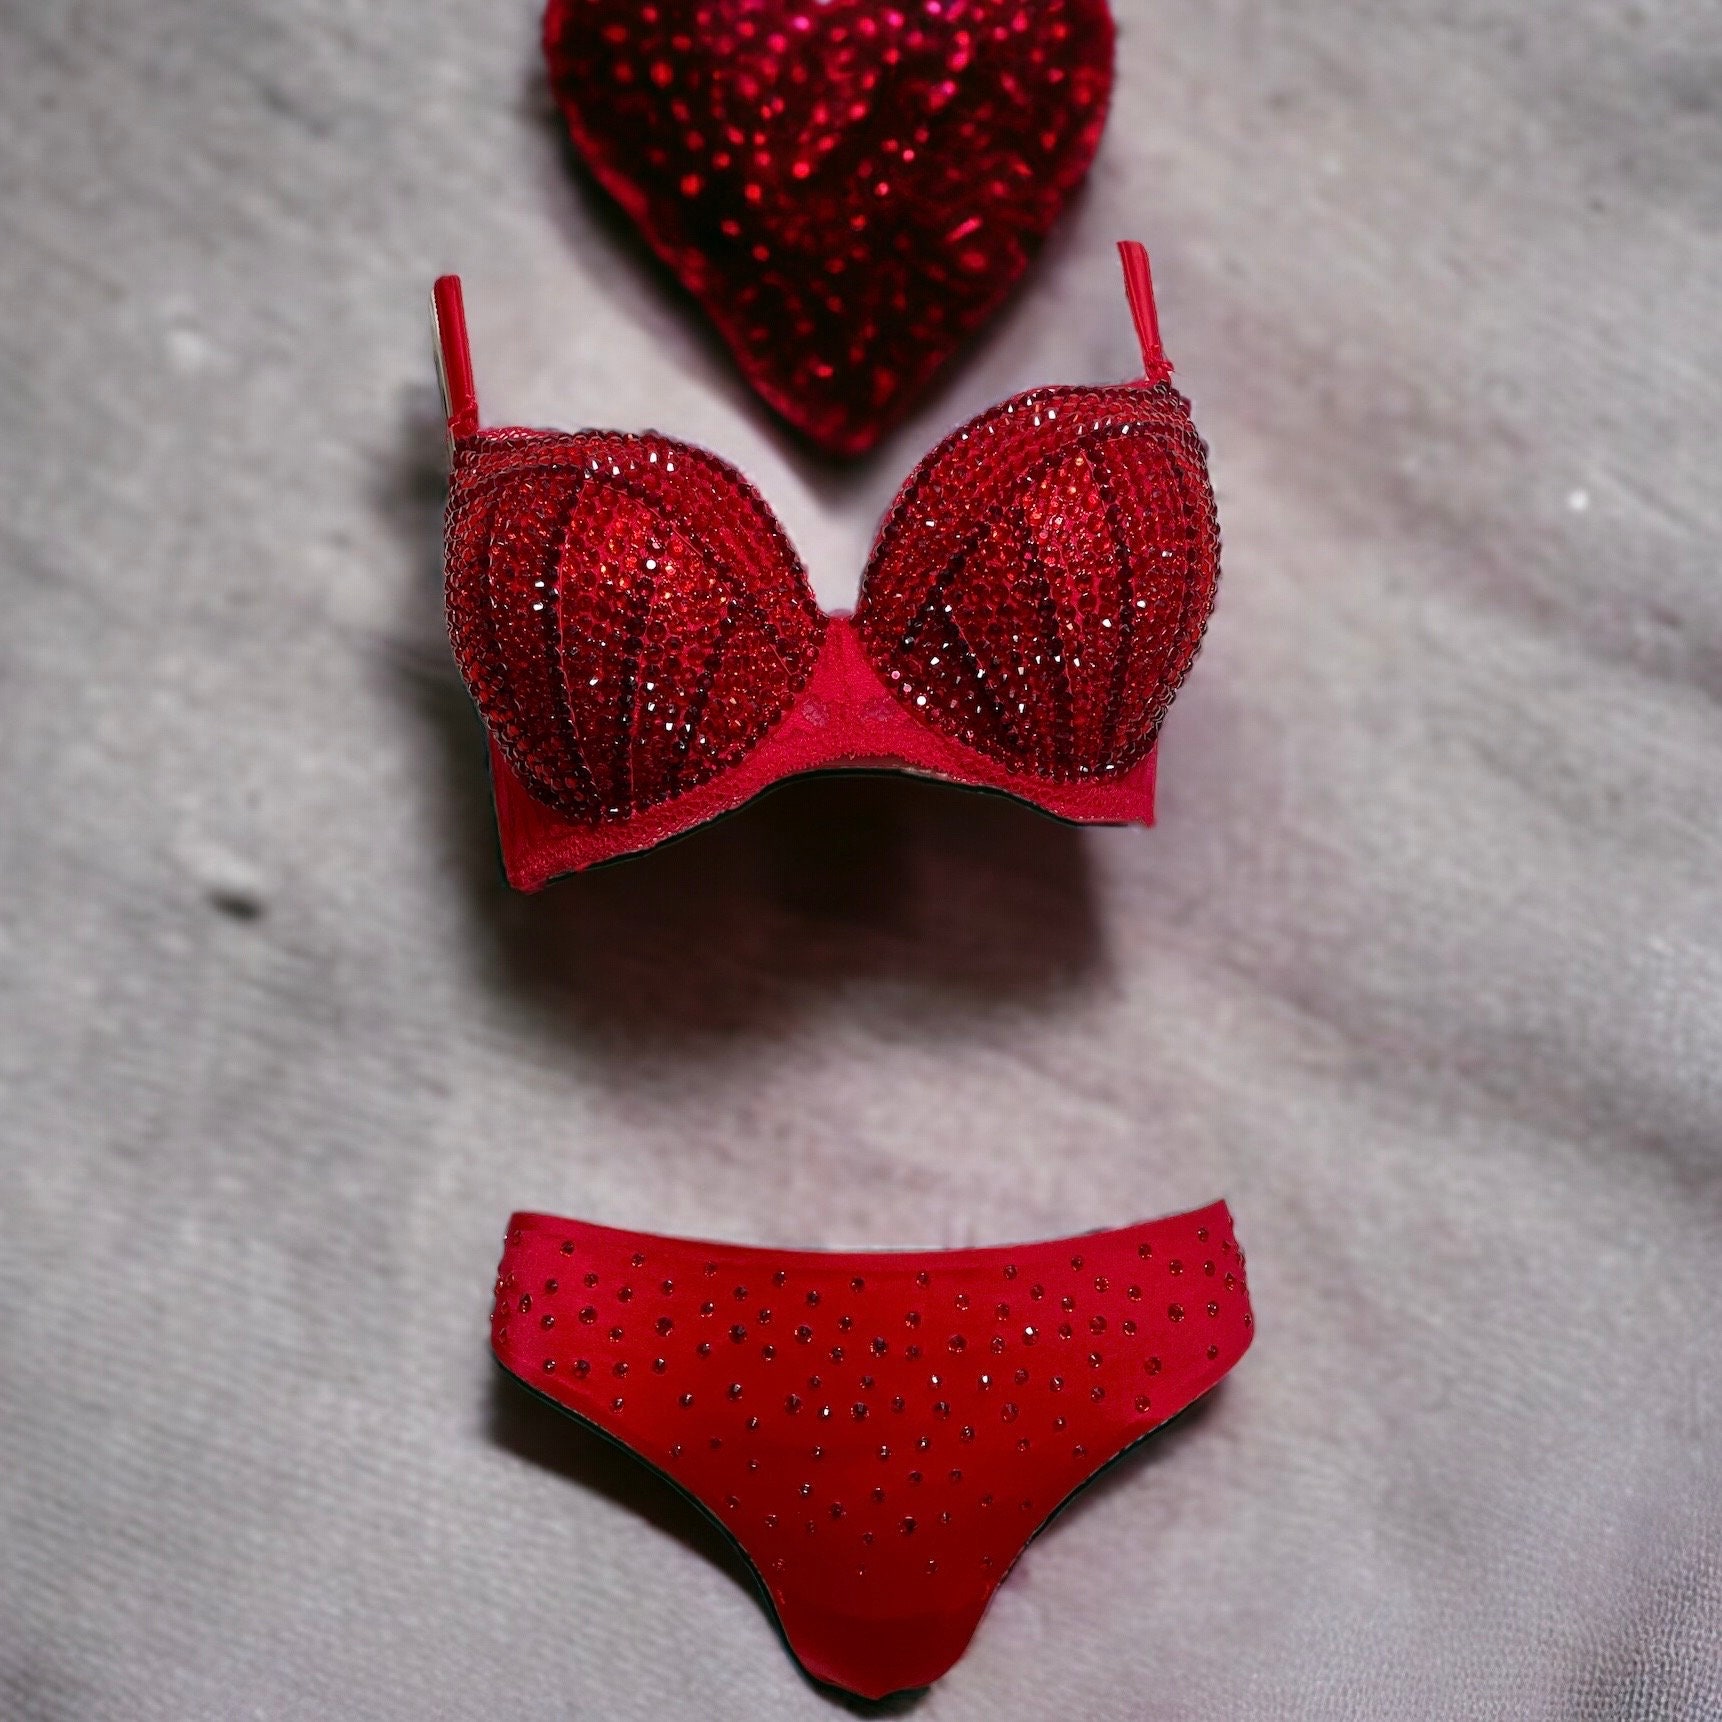 Red Rhinestone and Sequin Appliqué Embellished Push-up Bra, Size